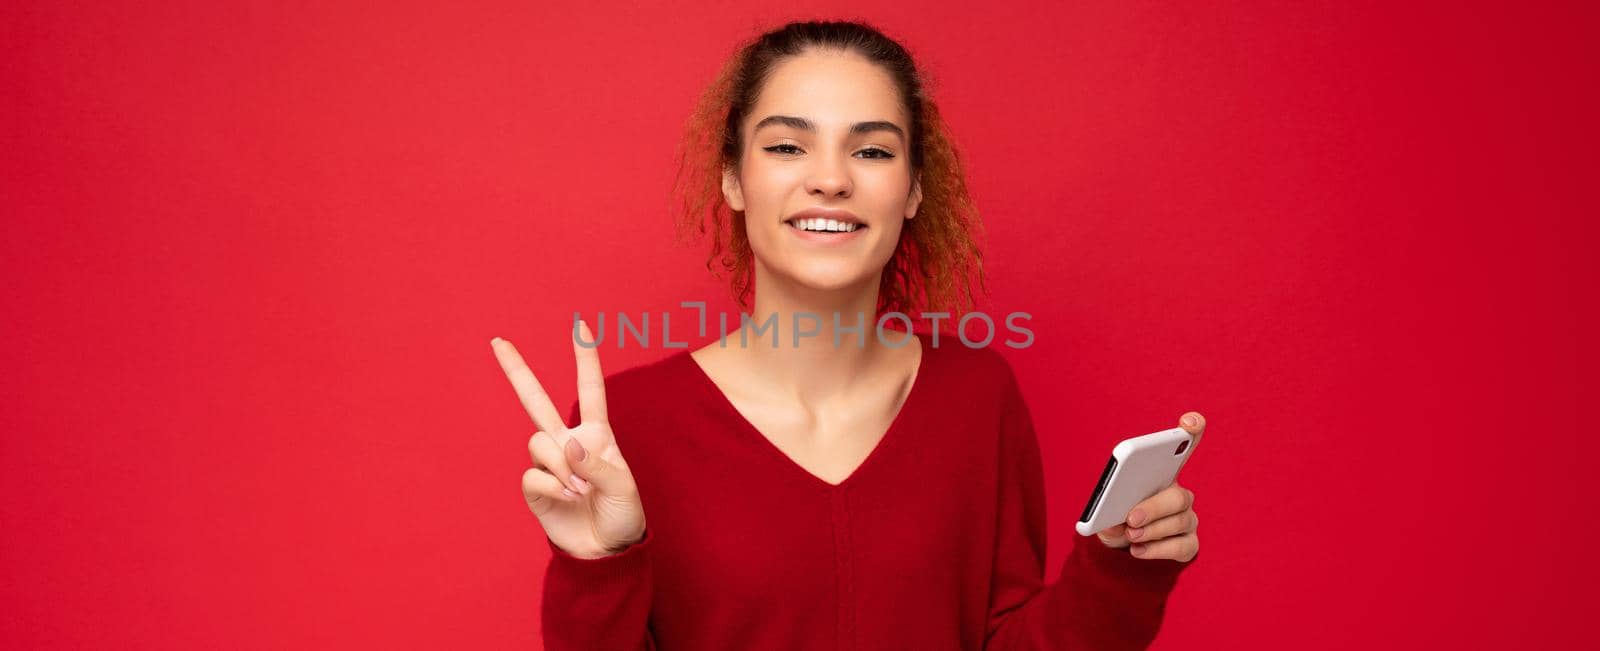 Photo of happy smiling woman with gathered curly hair wearing dark red sweater isolated over red background holding smartphone having fun and showing peace gesture looking at camera.